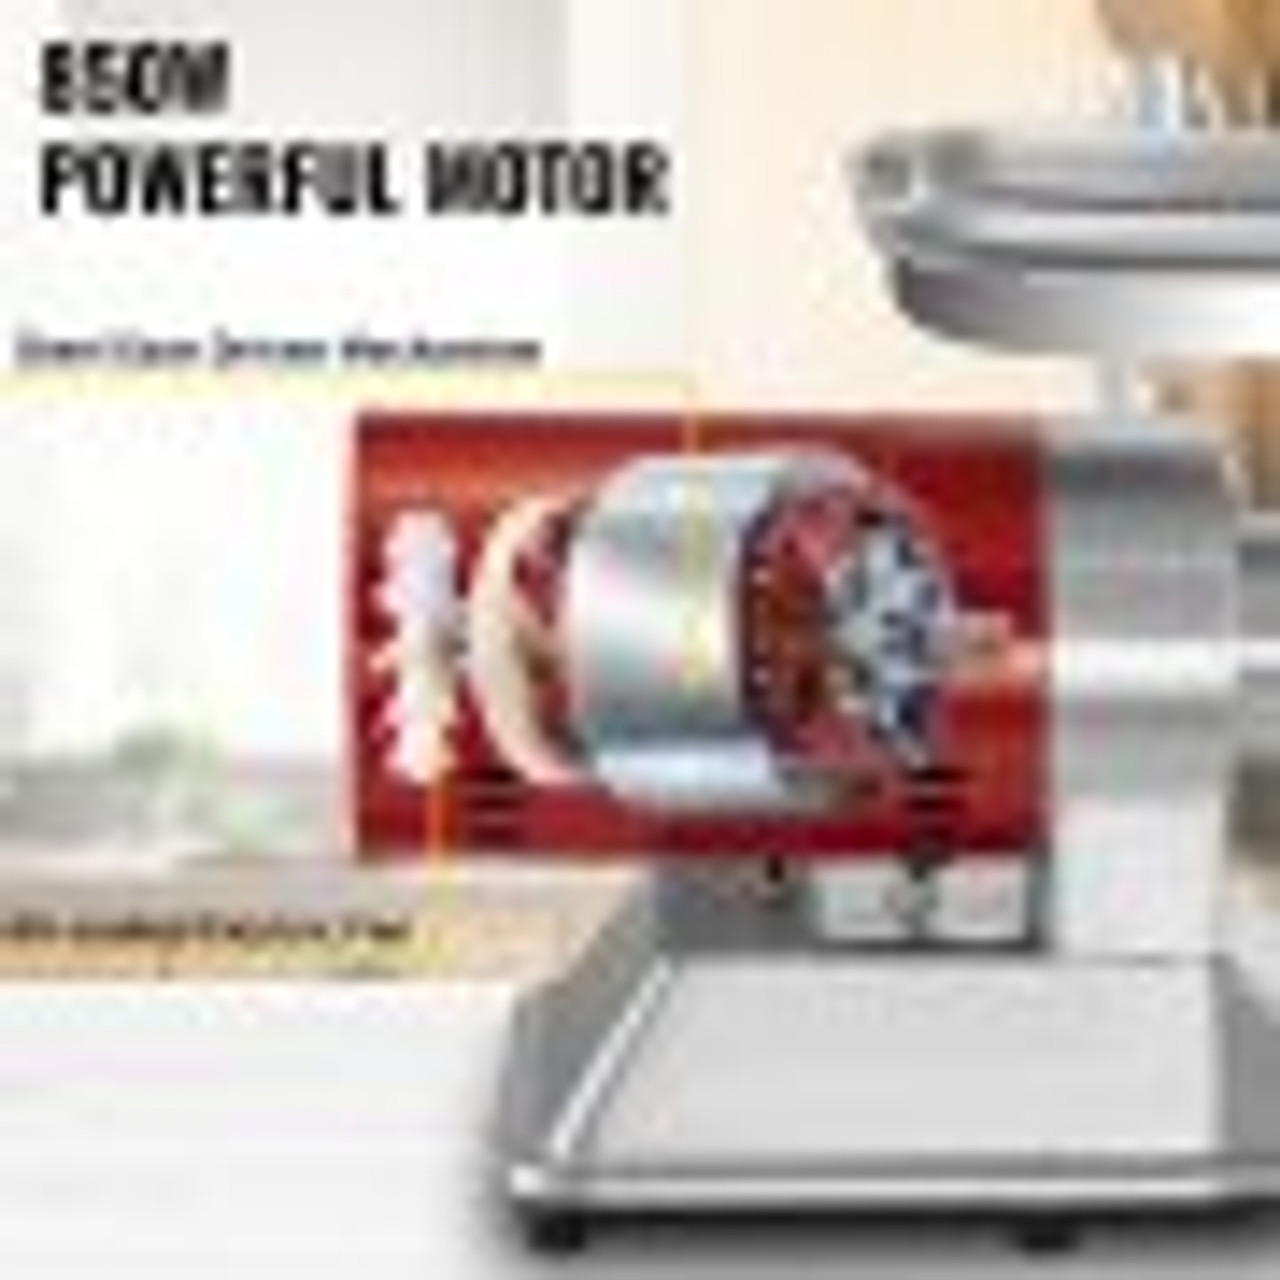 VEVOR Commercial Meat Grinder,550LB/h 1100W Electric Sausage Stuffer, 220  RPM Heavy Duty Stainless Steel Industrial Meat Mincer w/2 Blades, Grinding